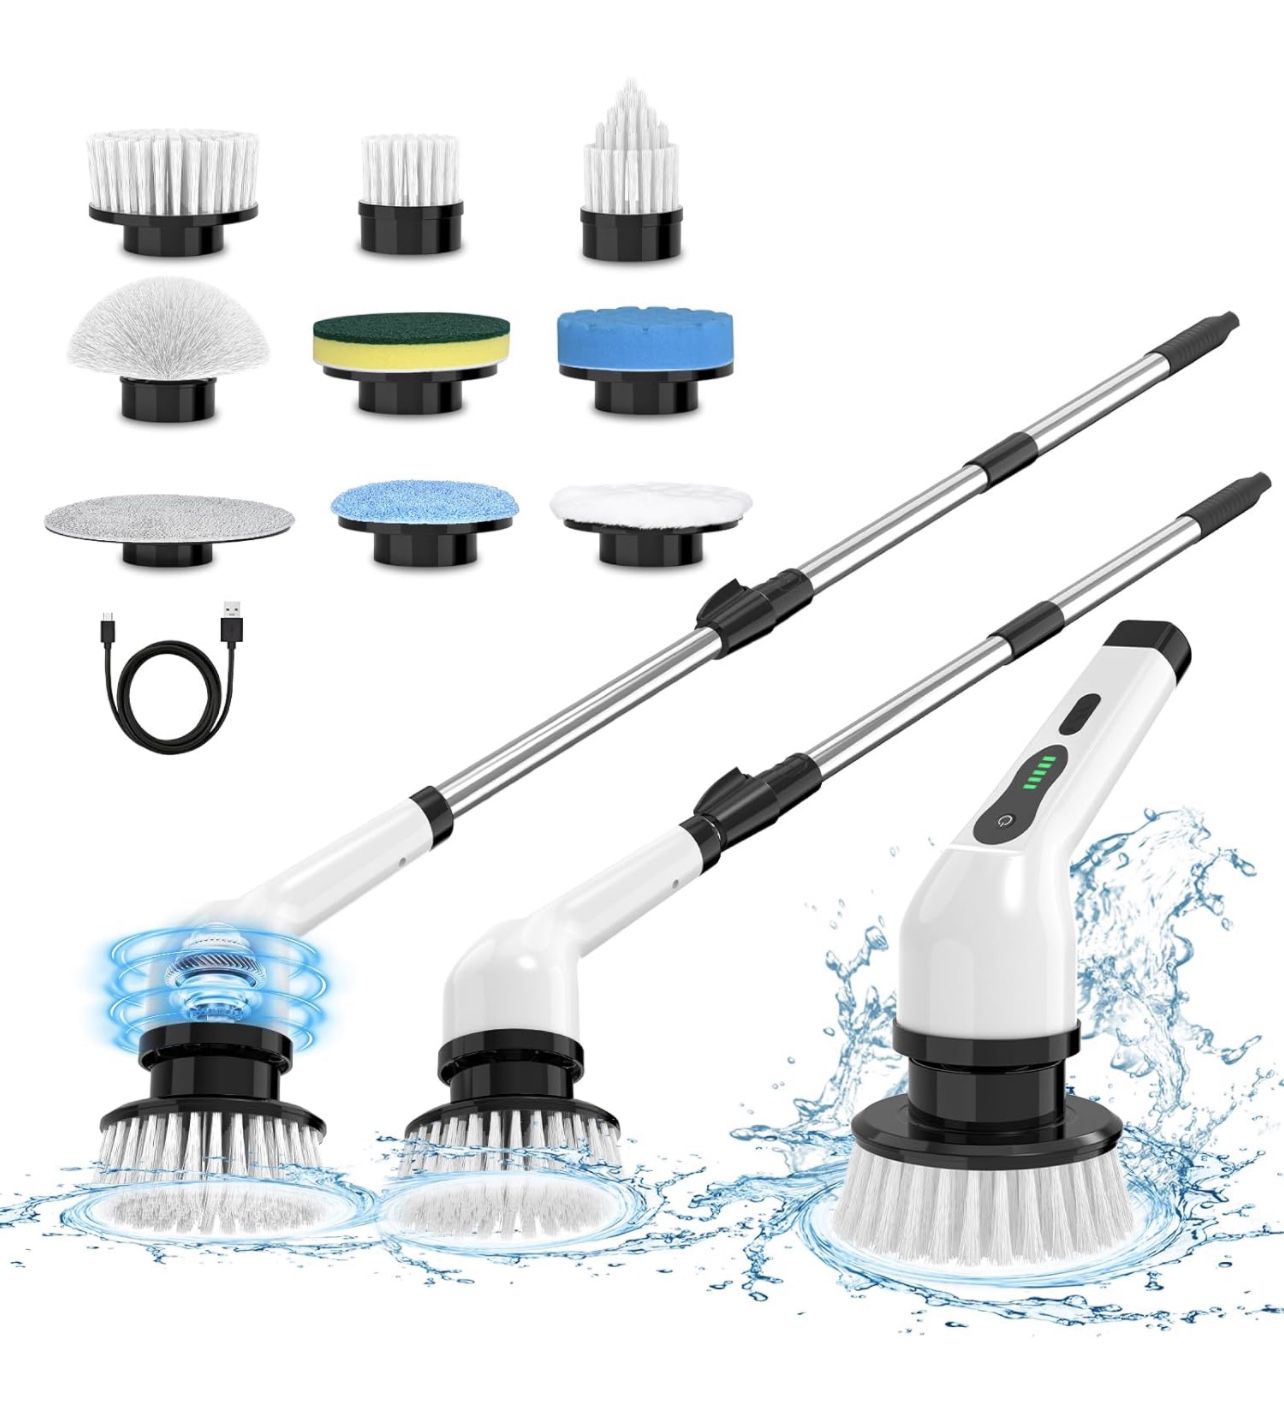 Electric Spin Scrubber, Adjustable Cordless Power Bathroom Scrubber, IPX7 Extension Arm, 9 Brush Heads 3 Speeds 150mins Work Time for Cleaning Shower 